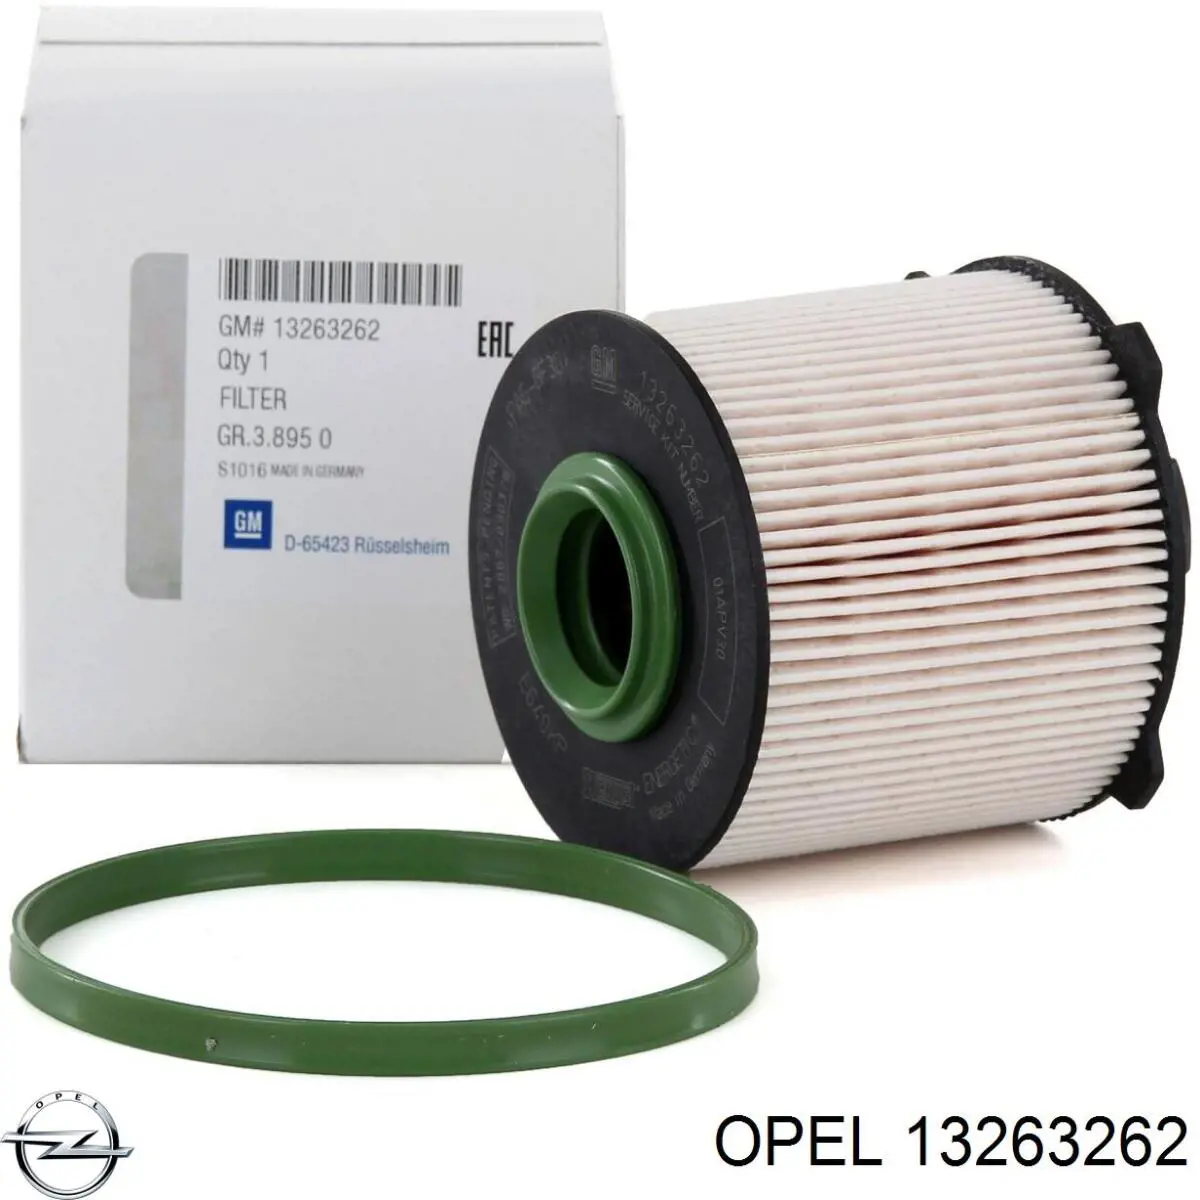 13263262 Opel filtro combustible